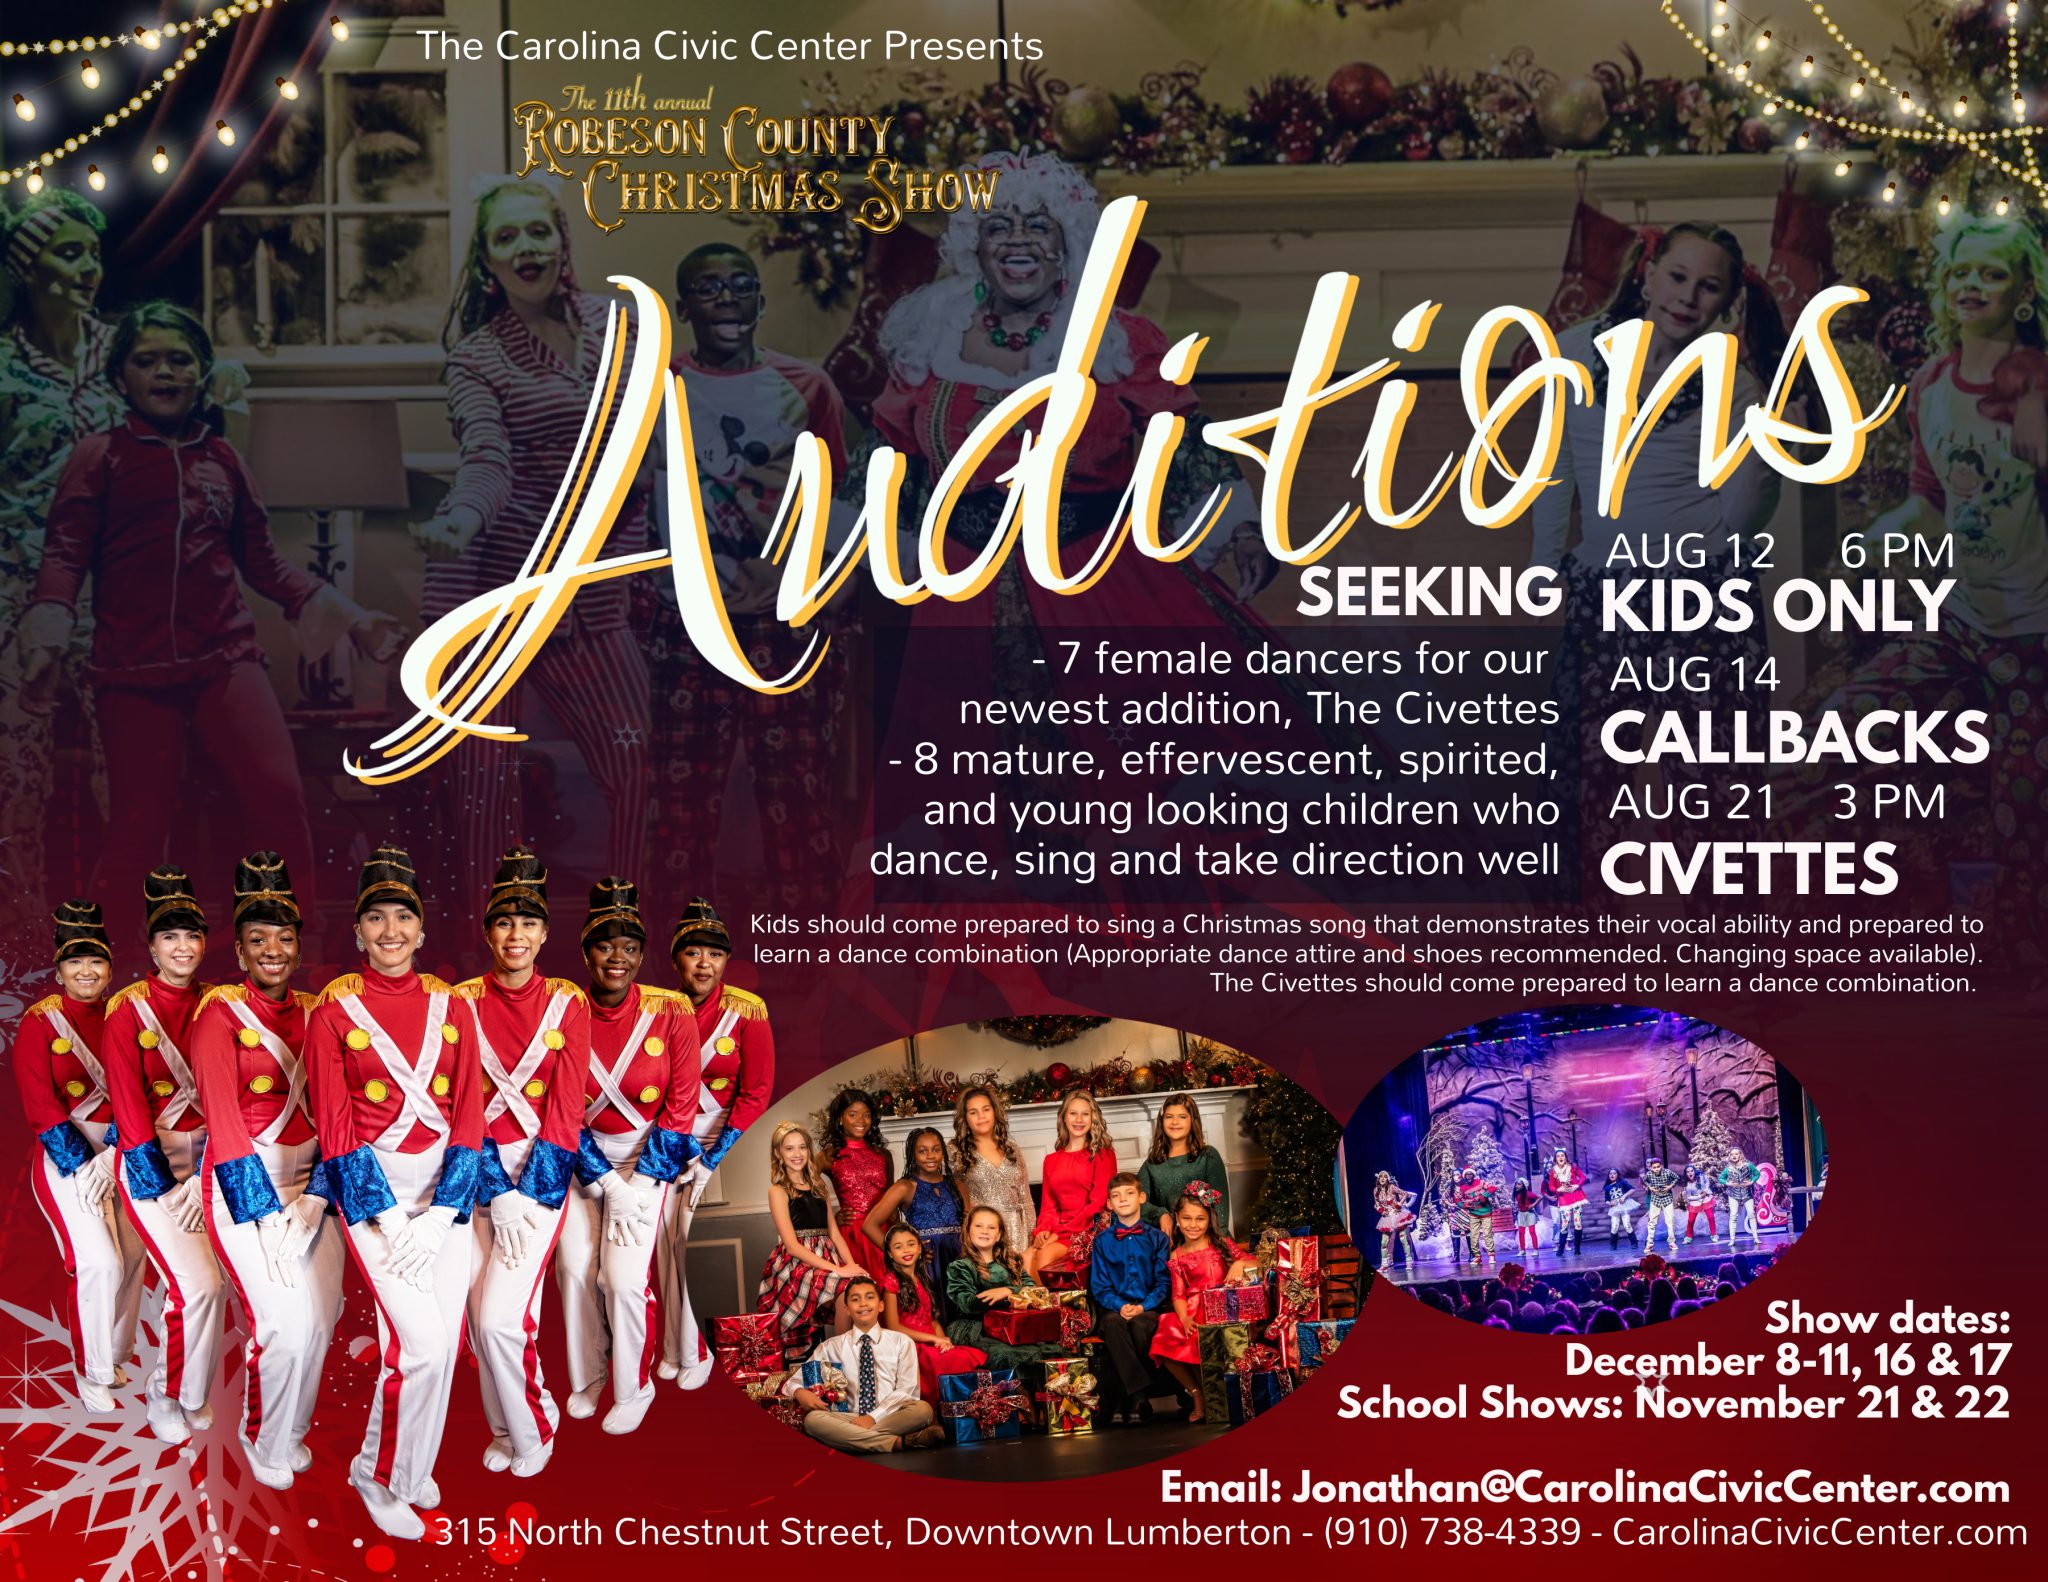 Robeson County Christmas Show Auditions Carolina Civic Center